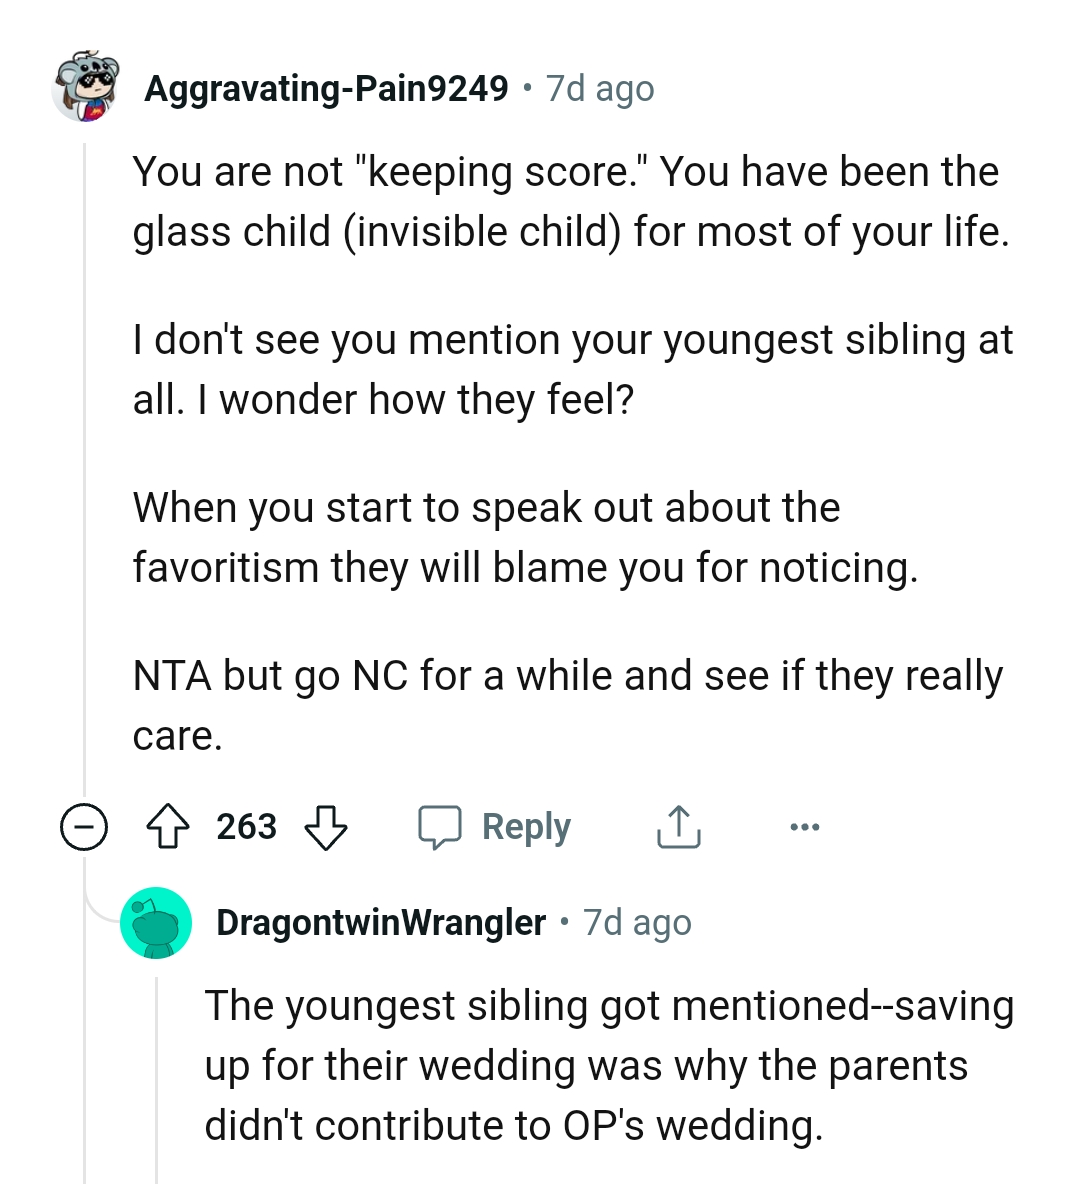 The OP didn't mention the younger sibling at all